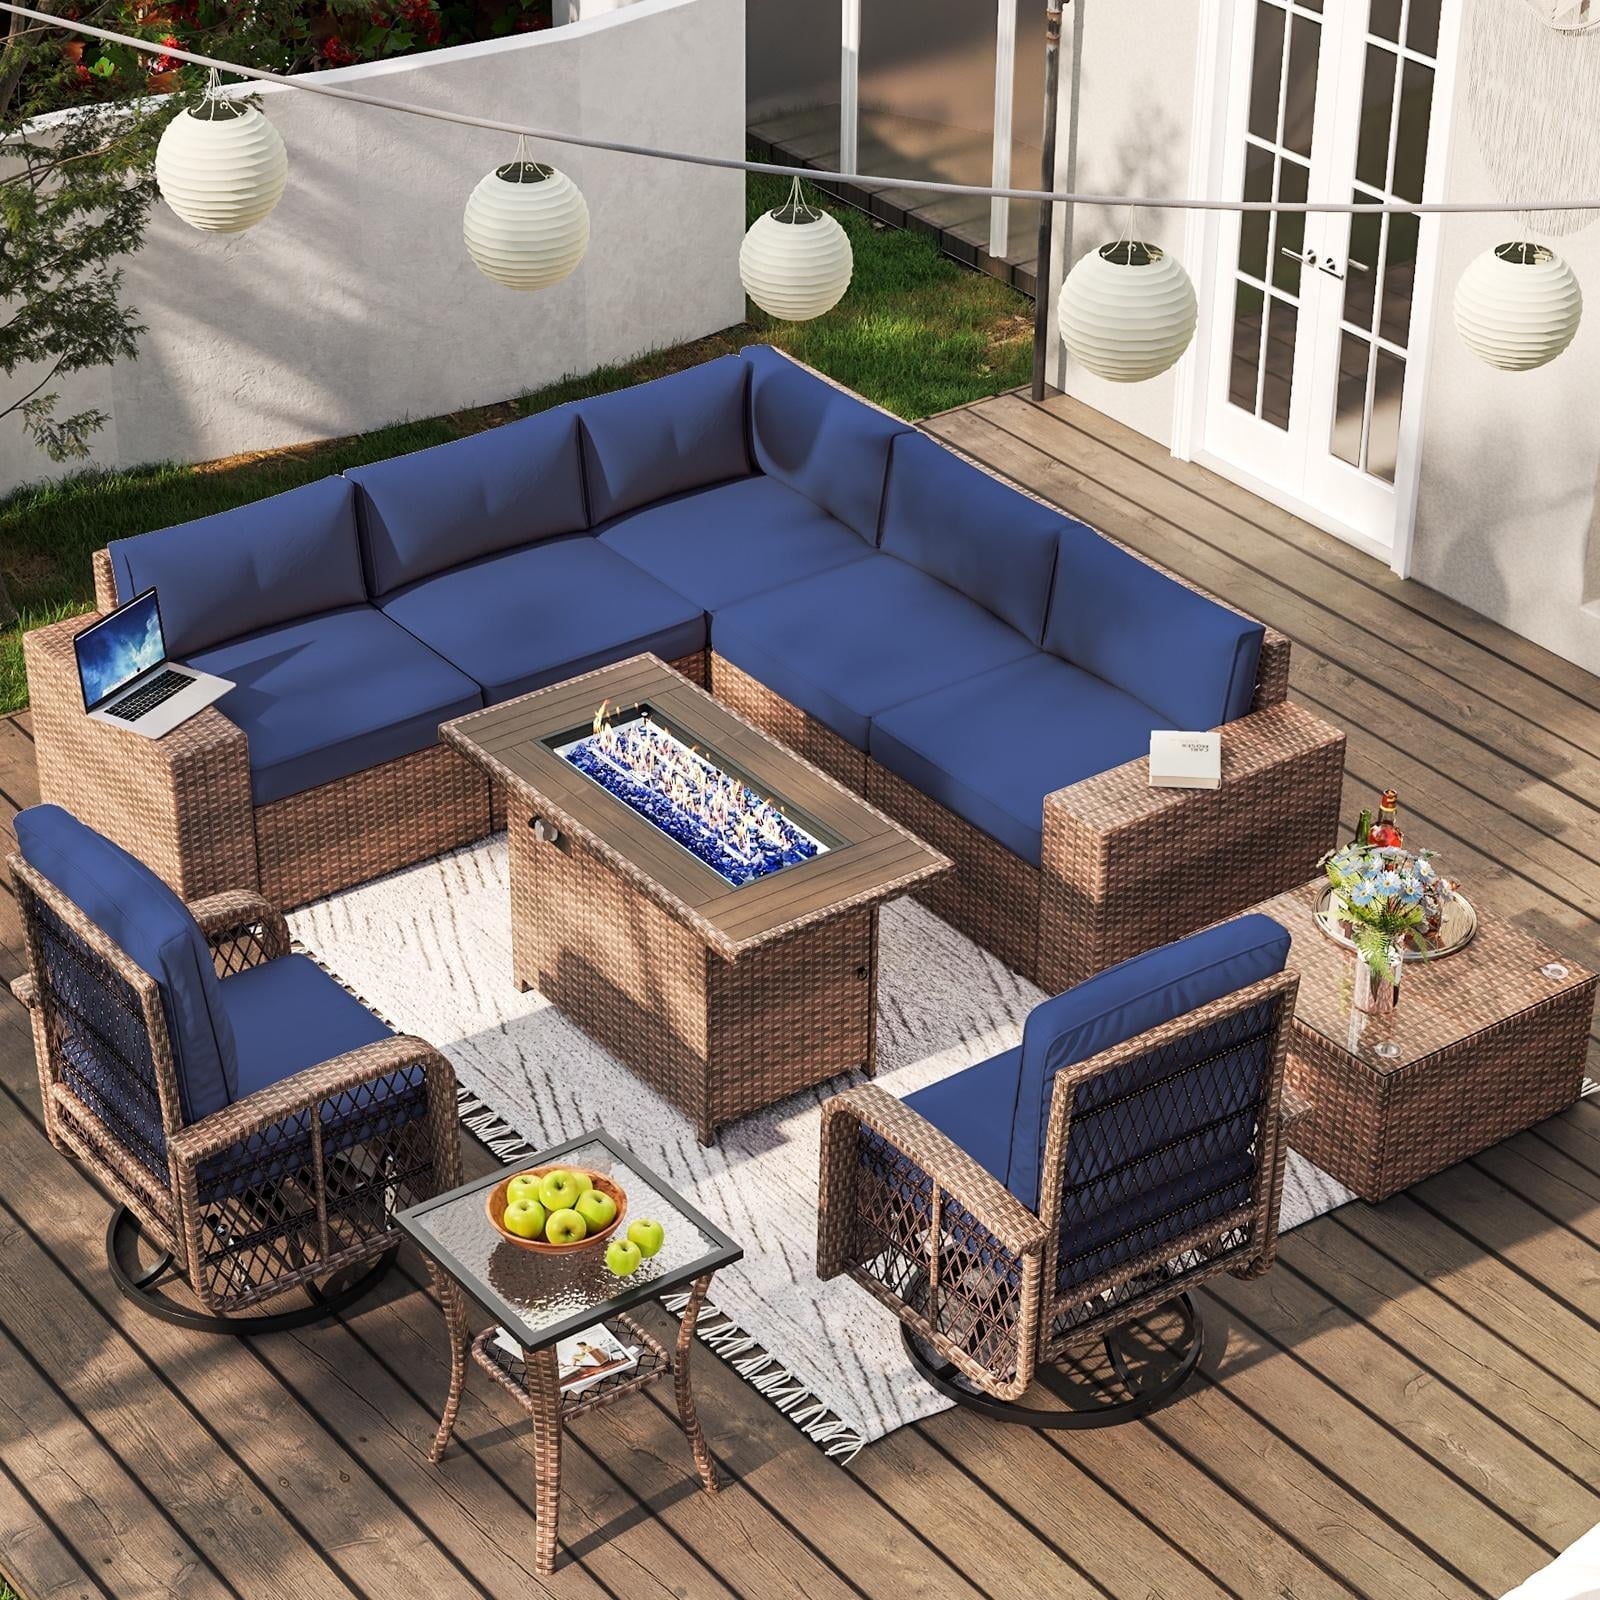 10pcs Patio Conversation Set with Fire Pit Table , Outdoor PE Rattan Sectional Sofa Sets with Swivel Chairs for Backyard,Blue